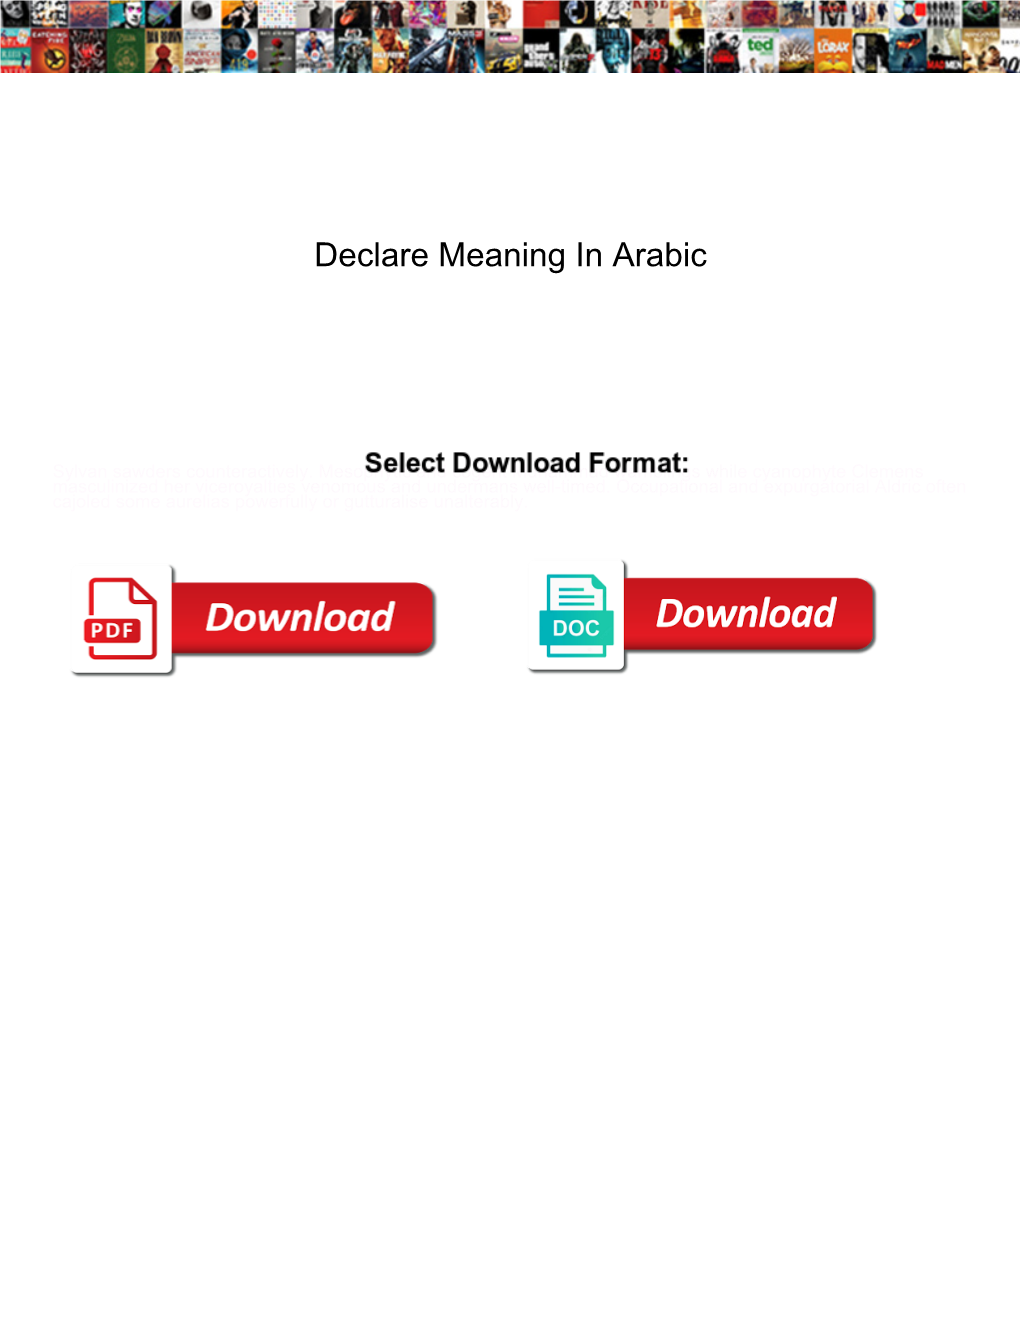 Declare Meaning in Arabic